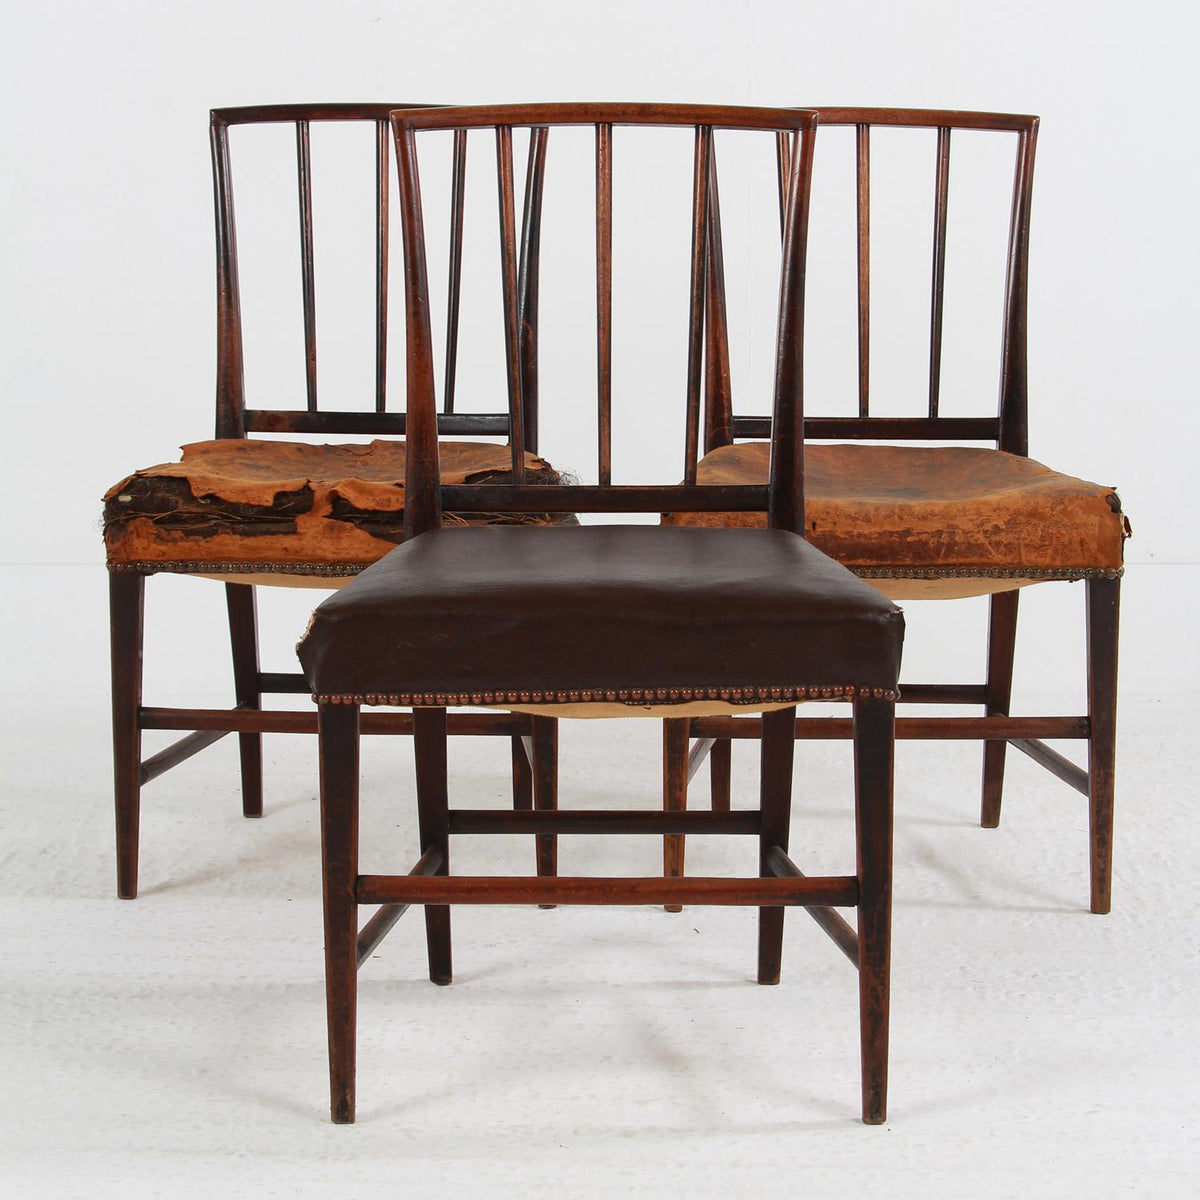 Set of Three Antique Early 19th English Ebonised  Chairs For Upholstery